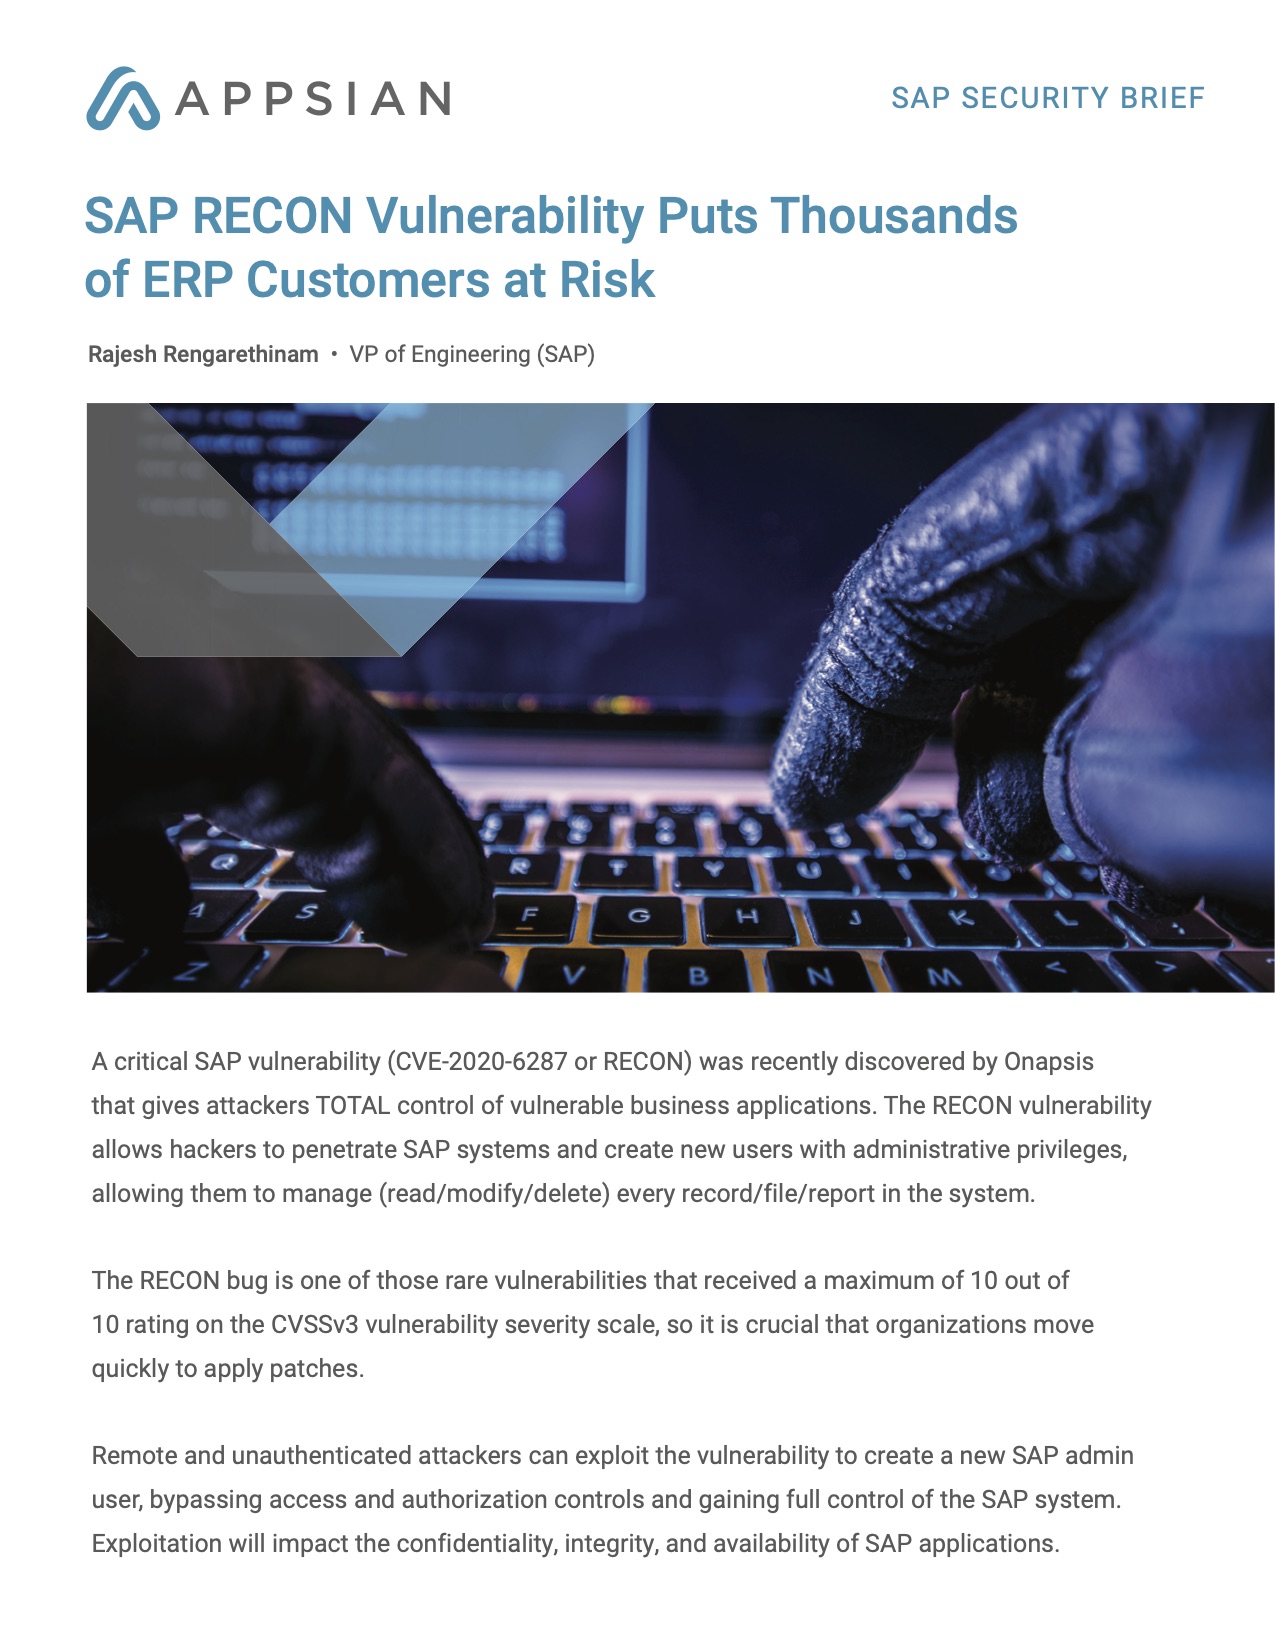 SAP RECON Vulnerability Puts Thousands of ERP Customers at Risk